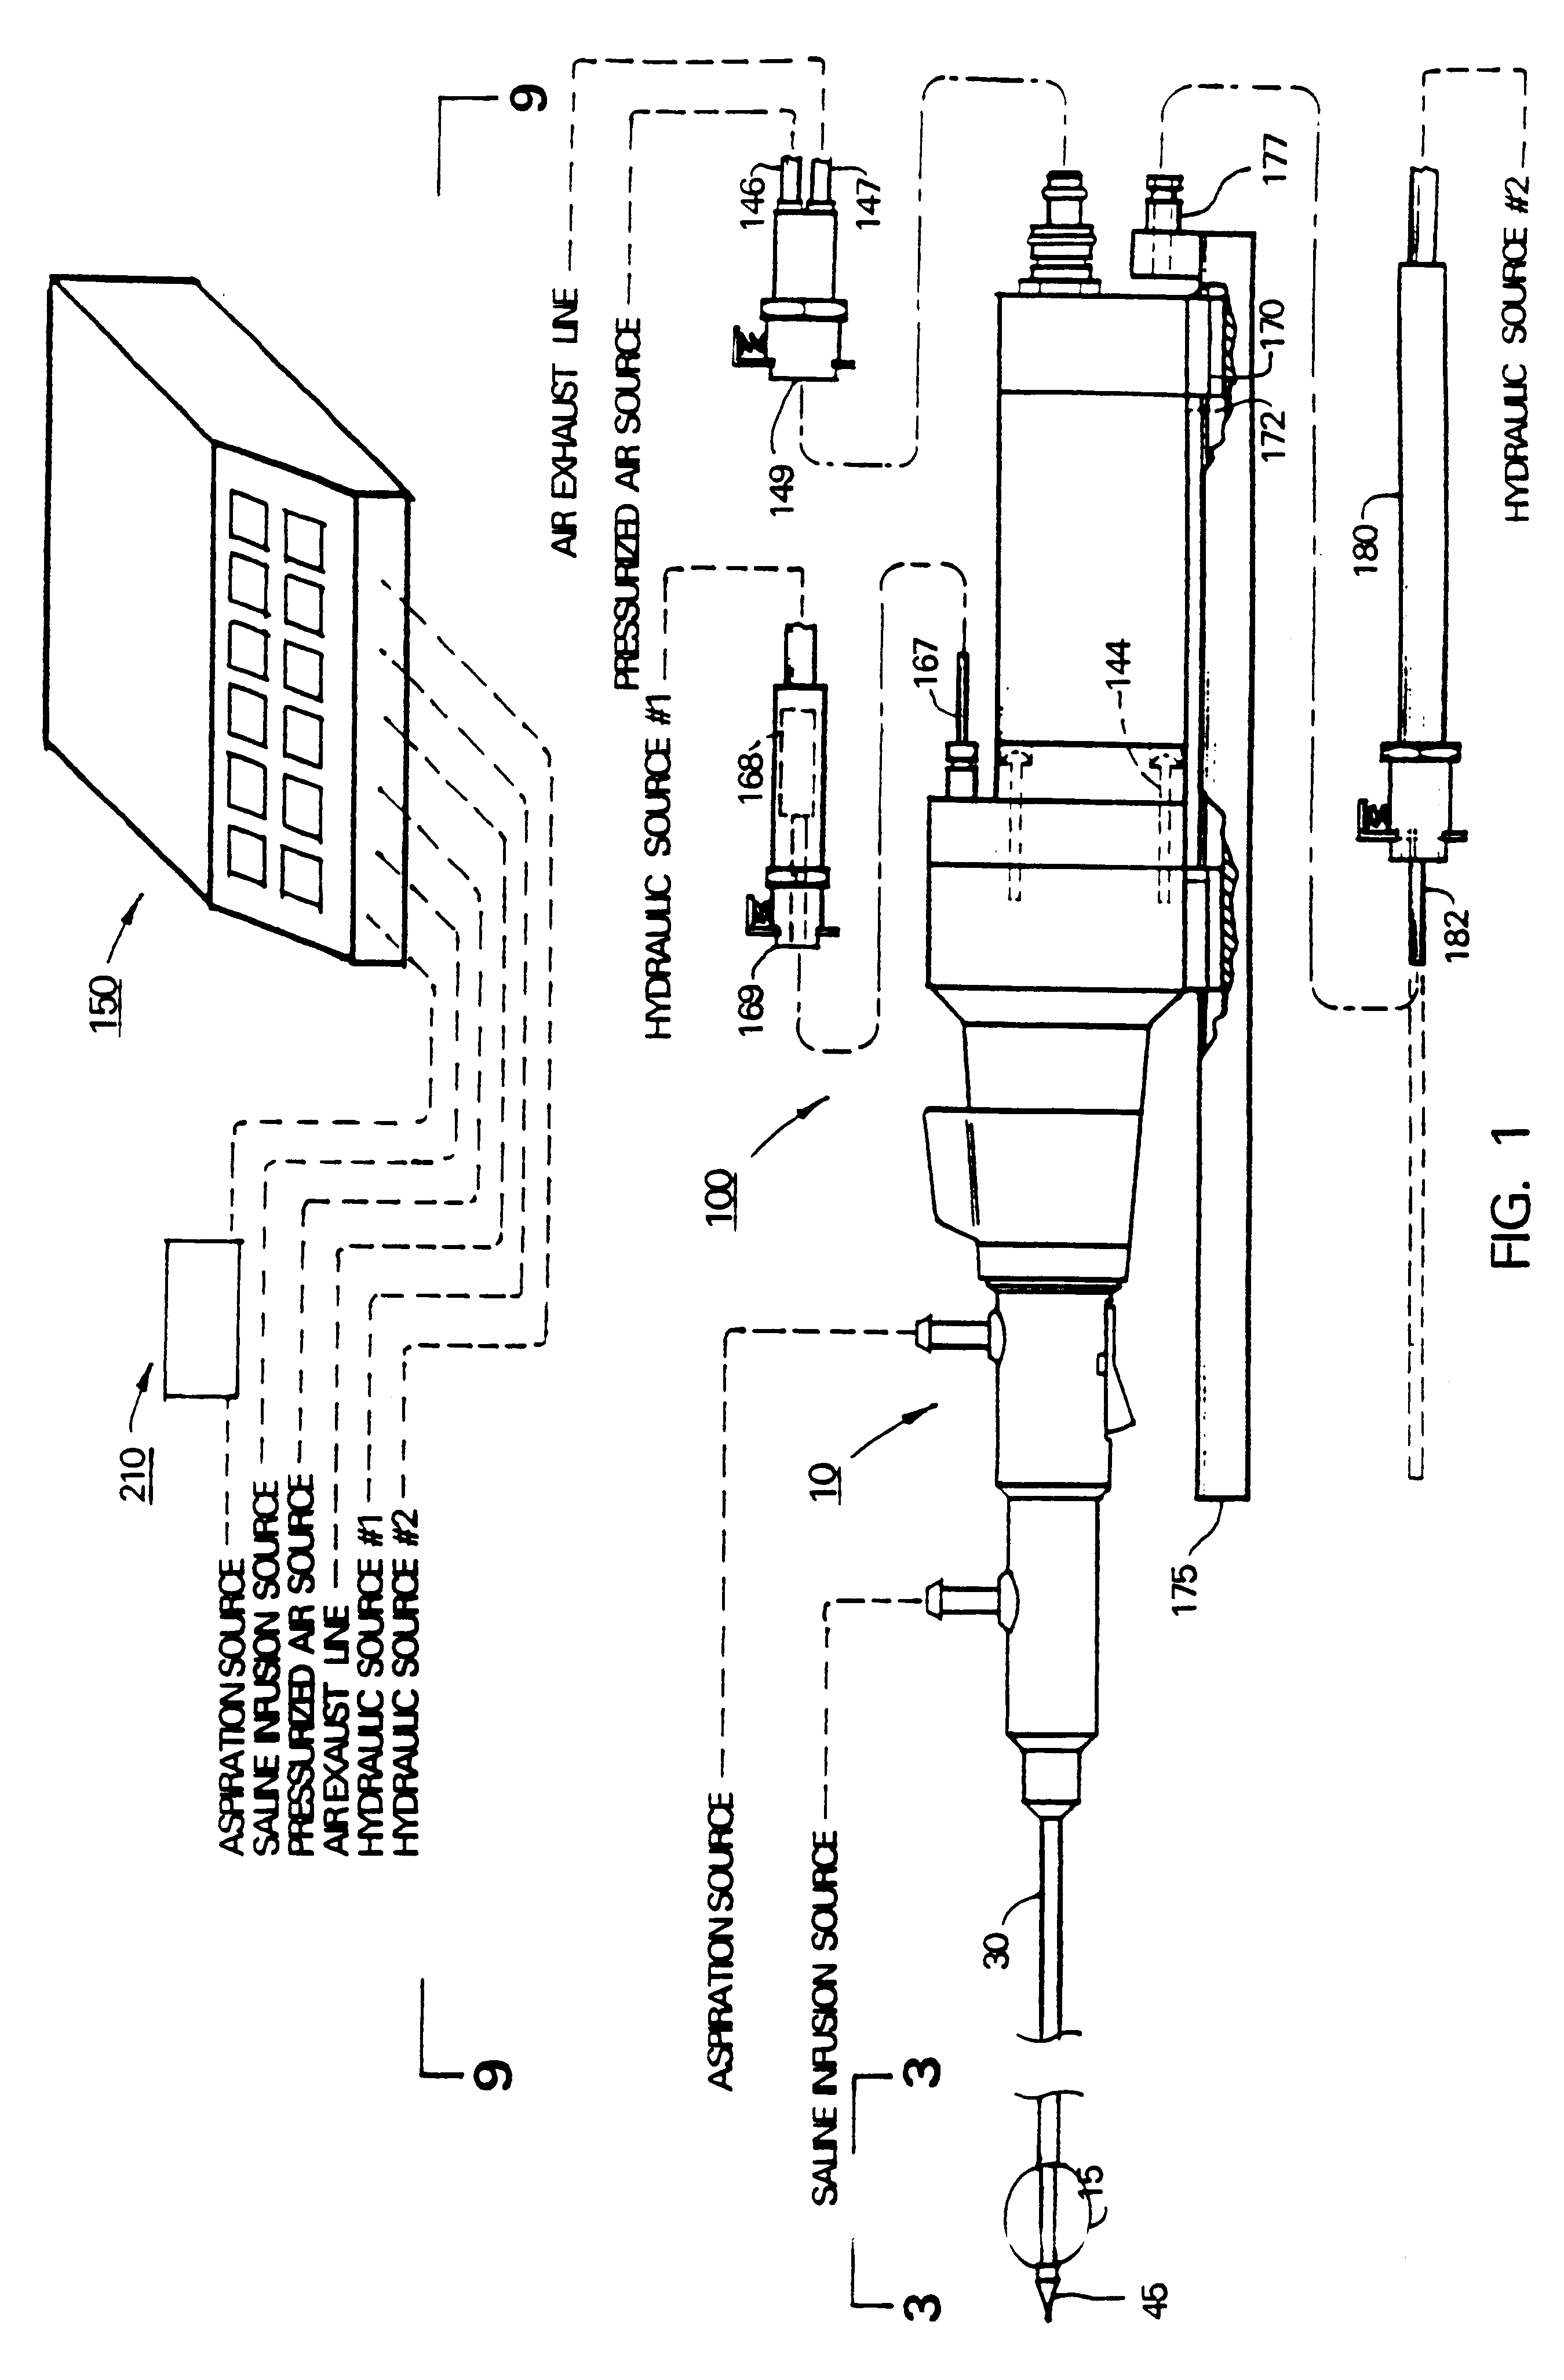 Excisional biopsy needle and method for use with image-directed technology